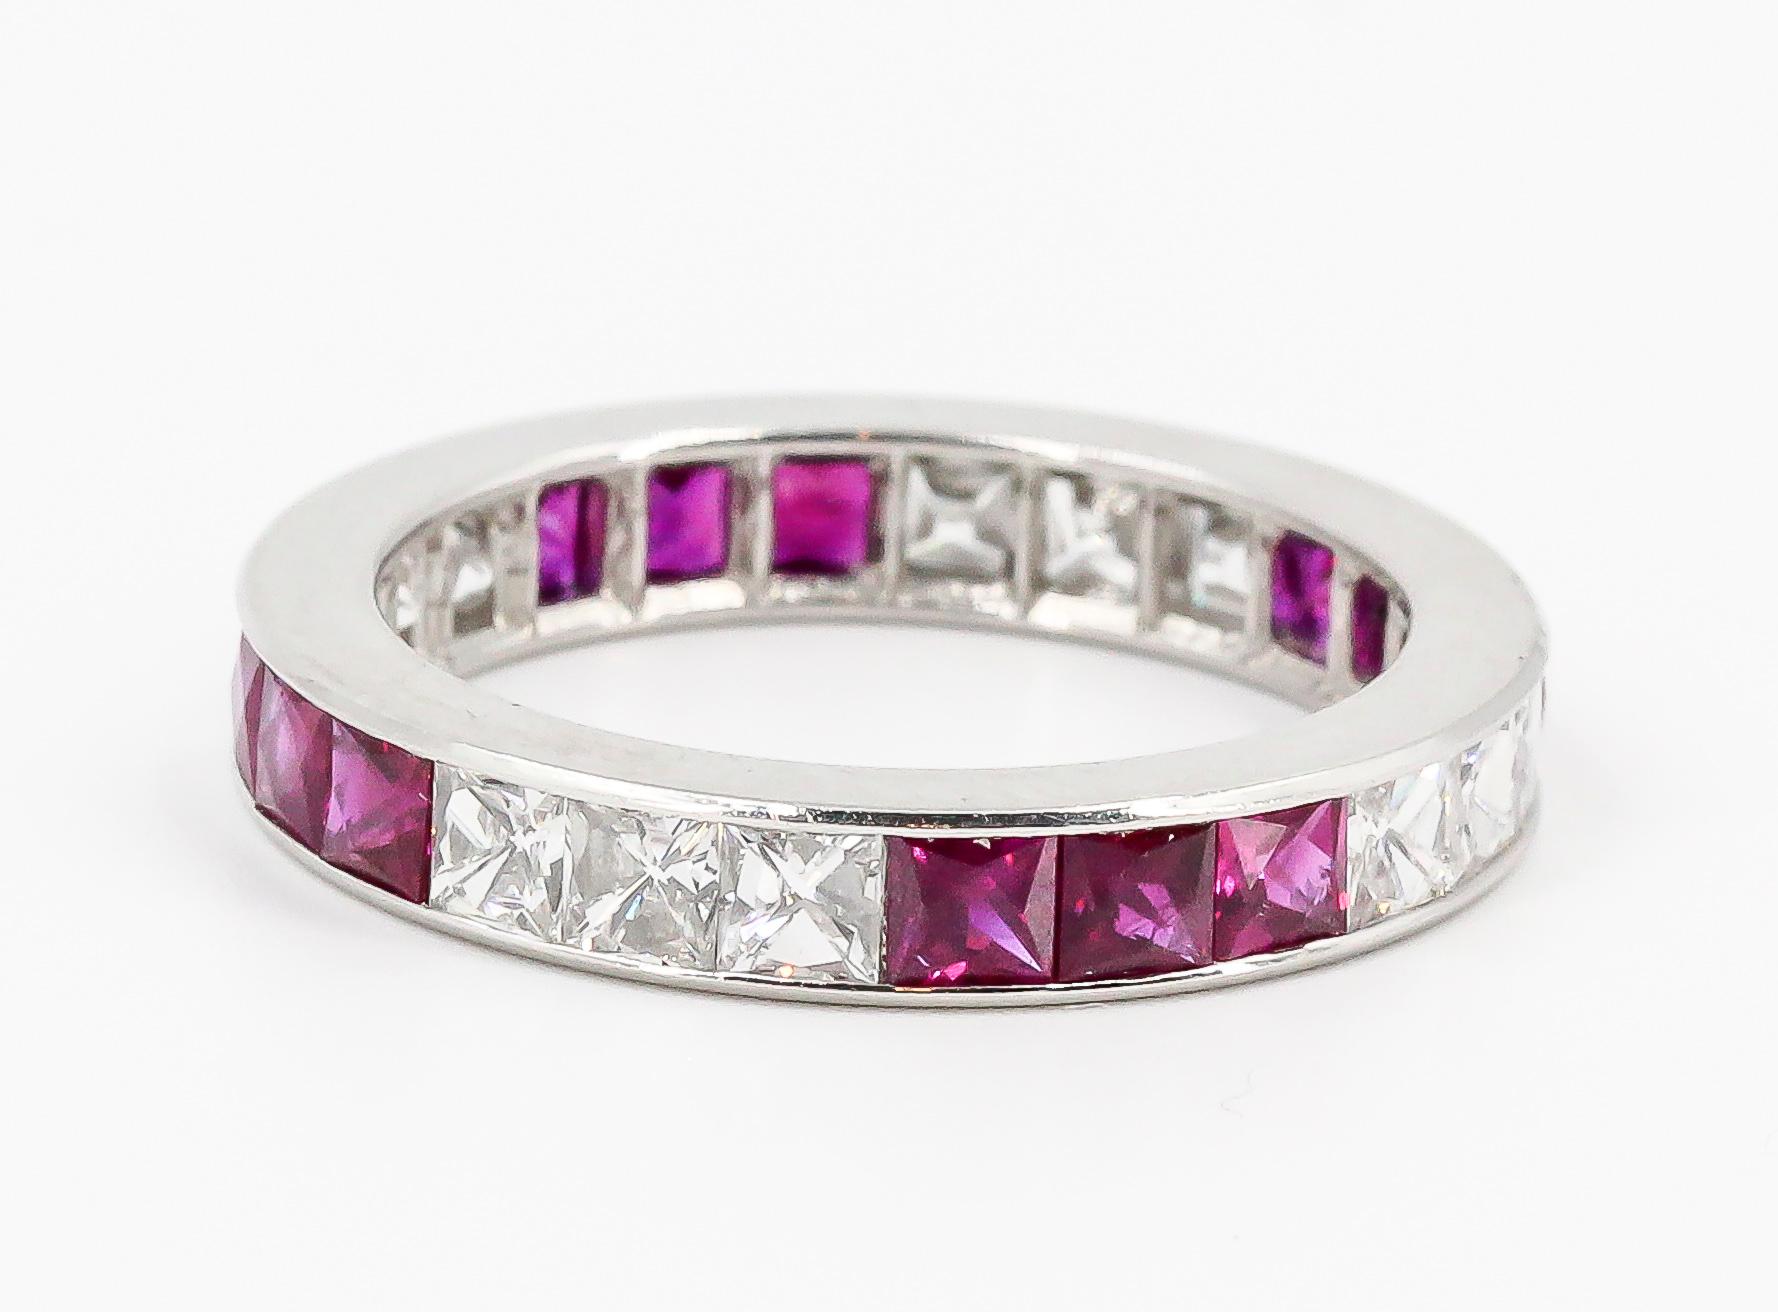 Women's French Cut Ruby, Diamond and Platinum Band